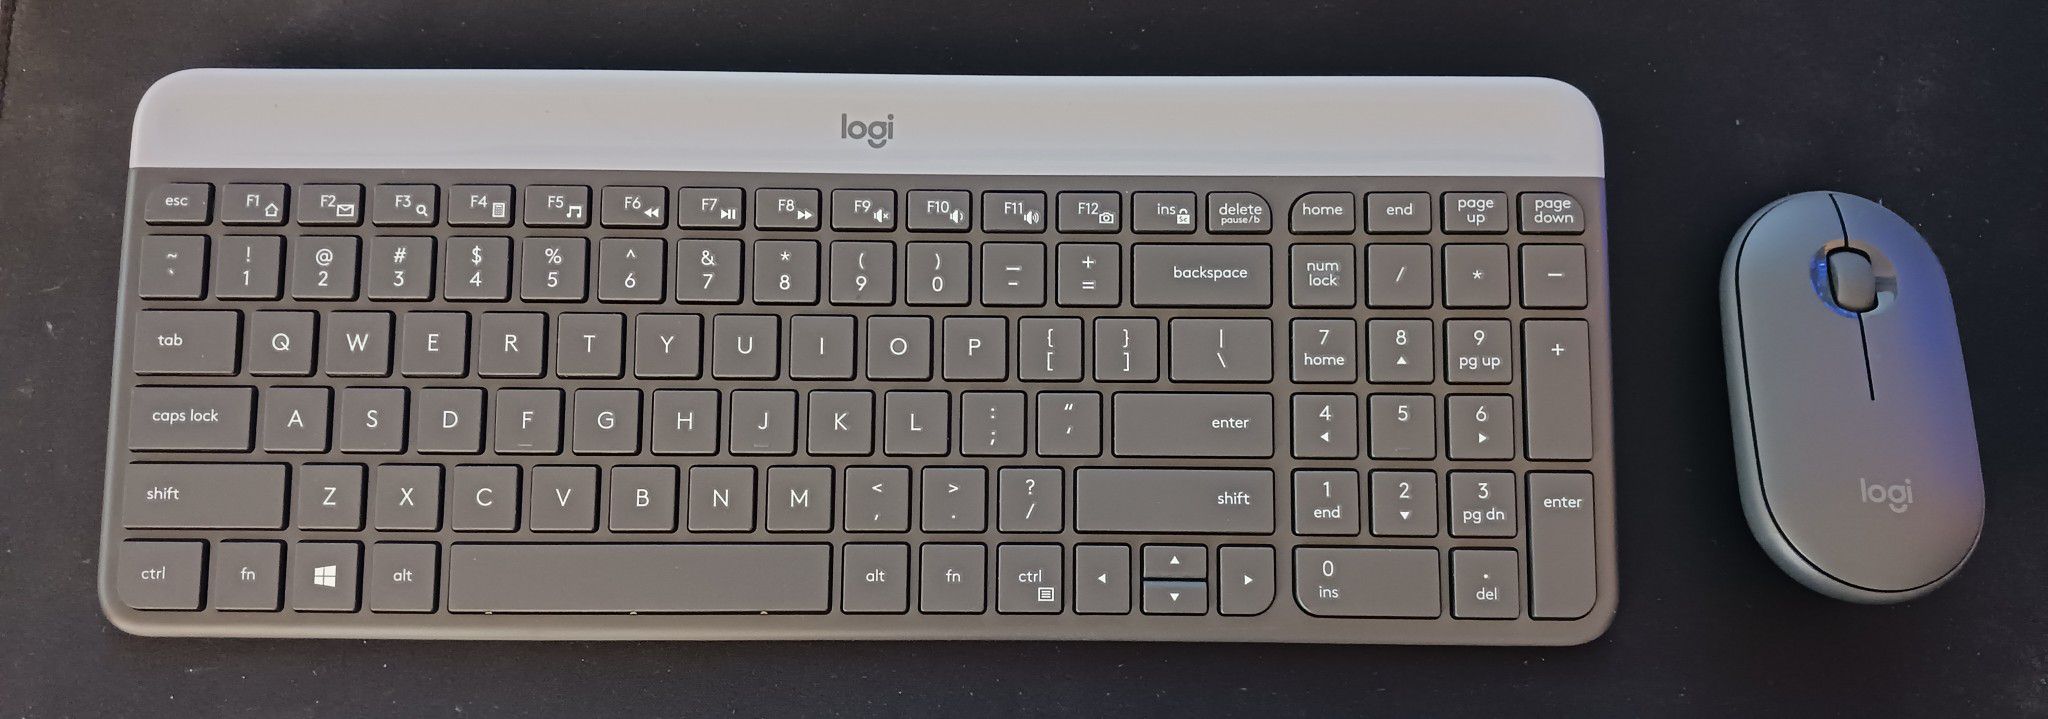 Logitech Ultra-Slim Wireless Keyboard And Mouse Setup In Like New Condition Working Perfectly 